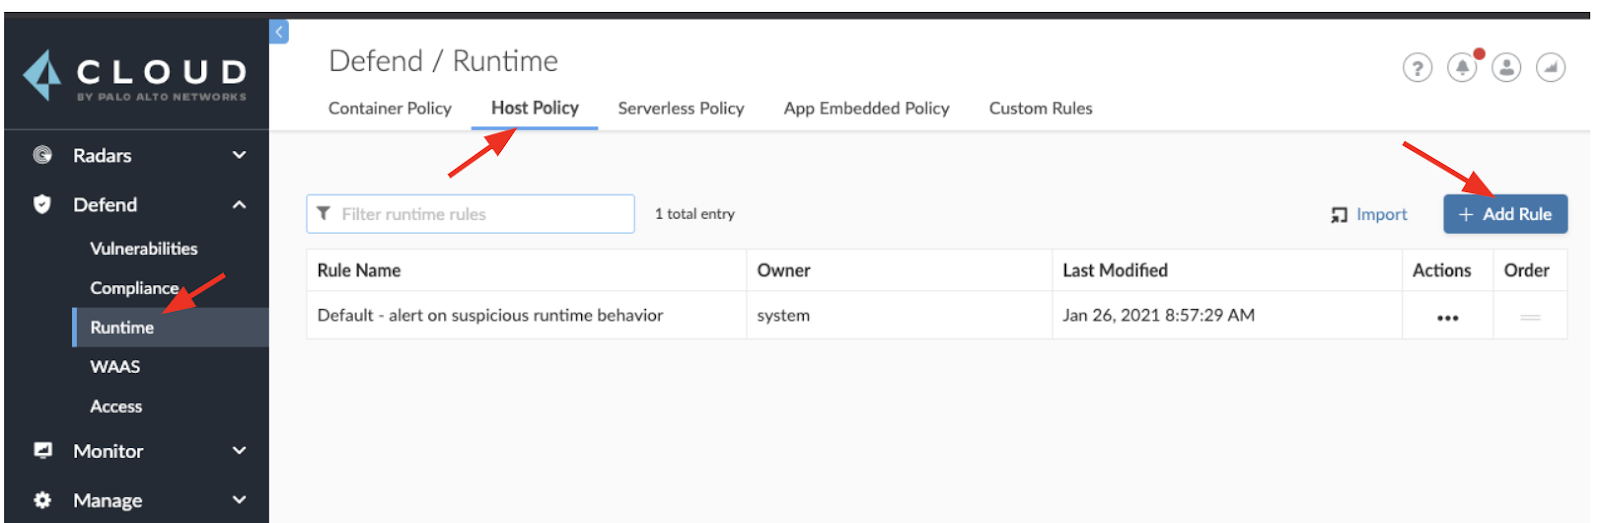 Host policy tabbed page